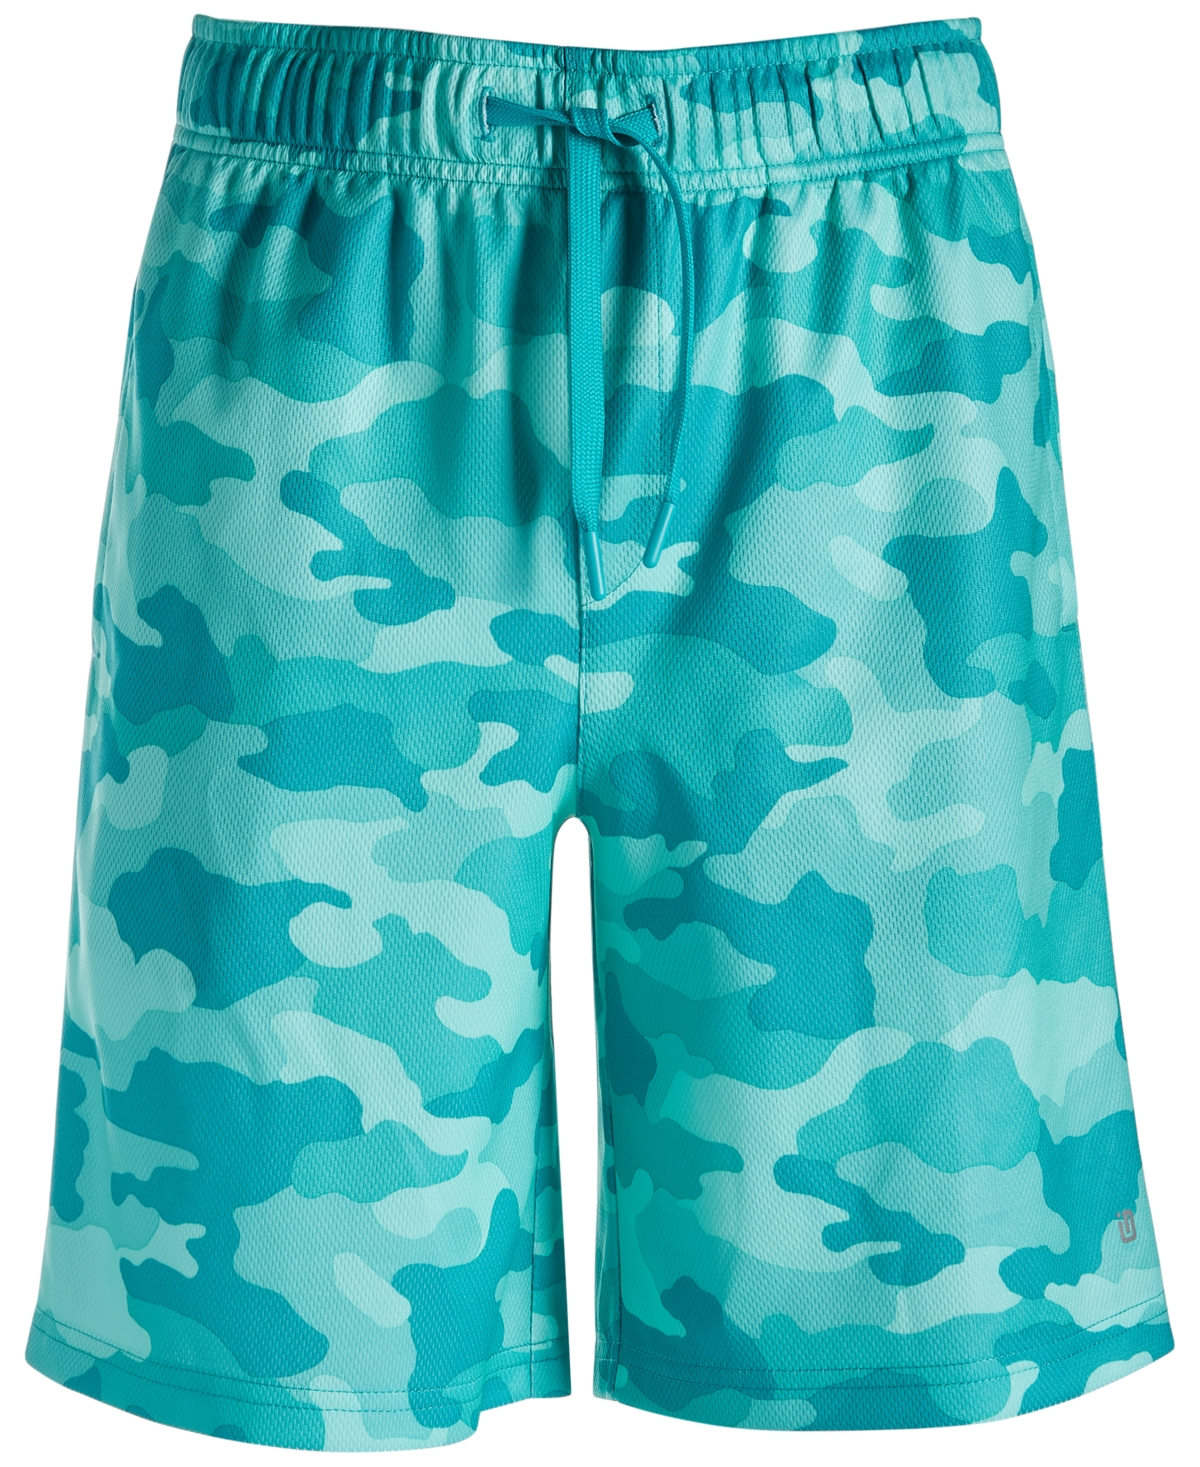 ID IDEOLOGY TODDLER & LITTLE BOYS CAMO-PRINT SHORTS, CREATED FOR MACY'S